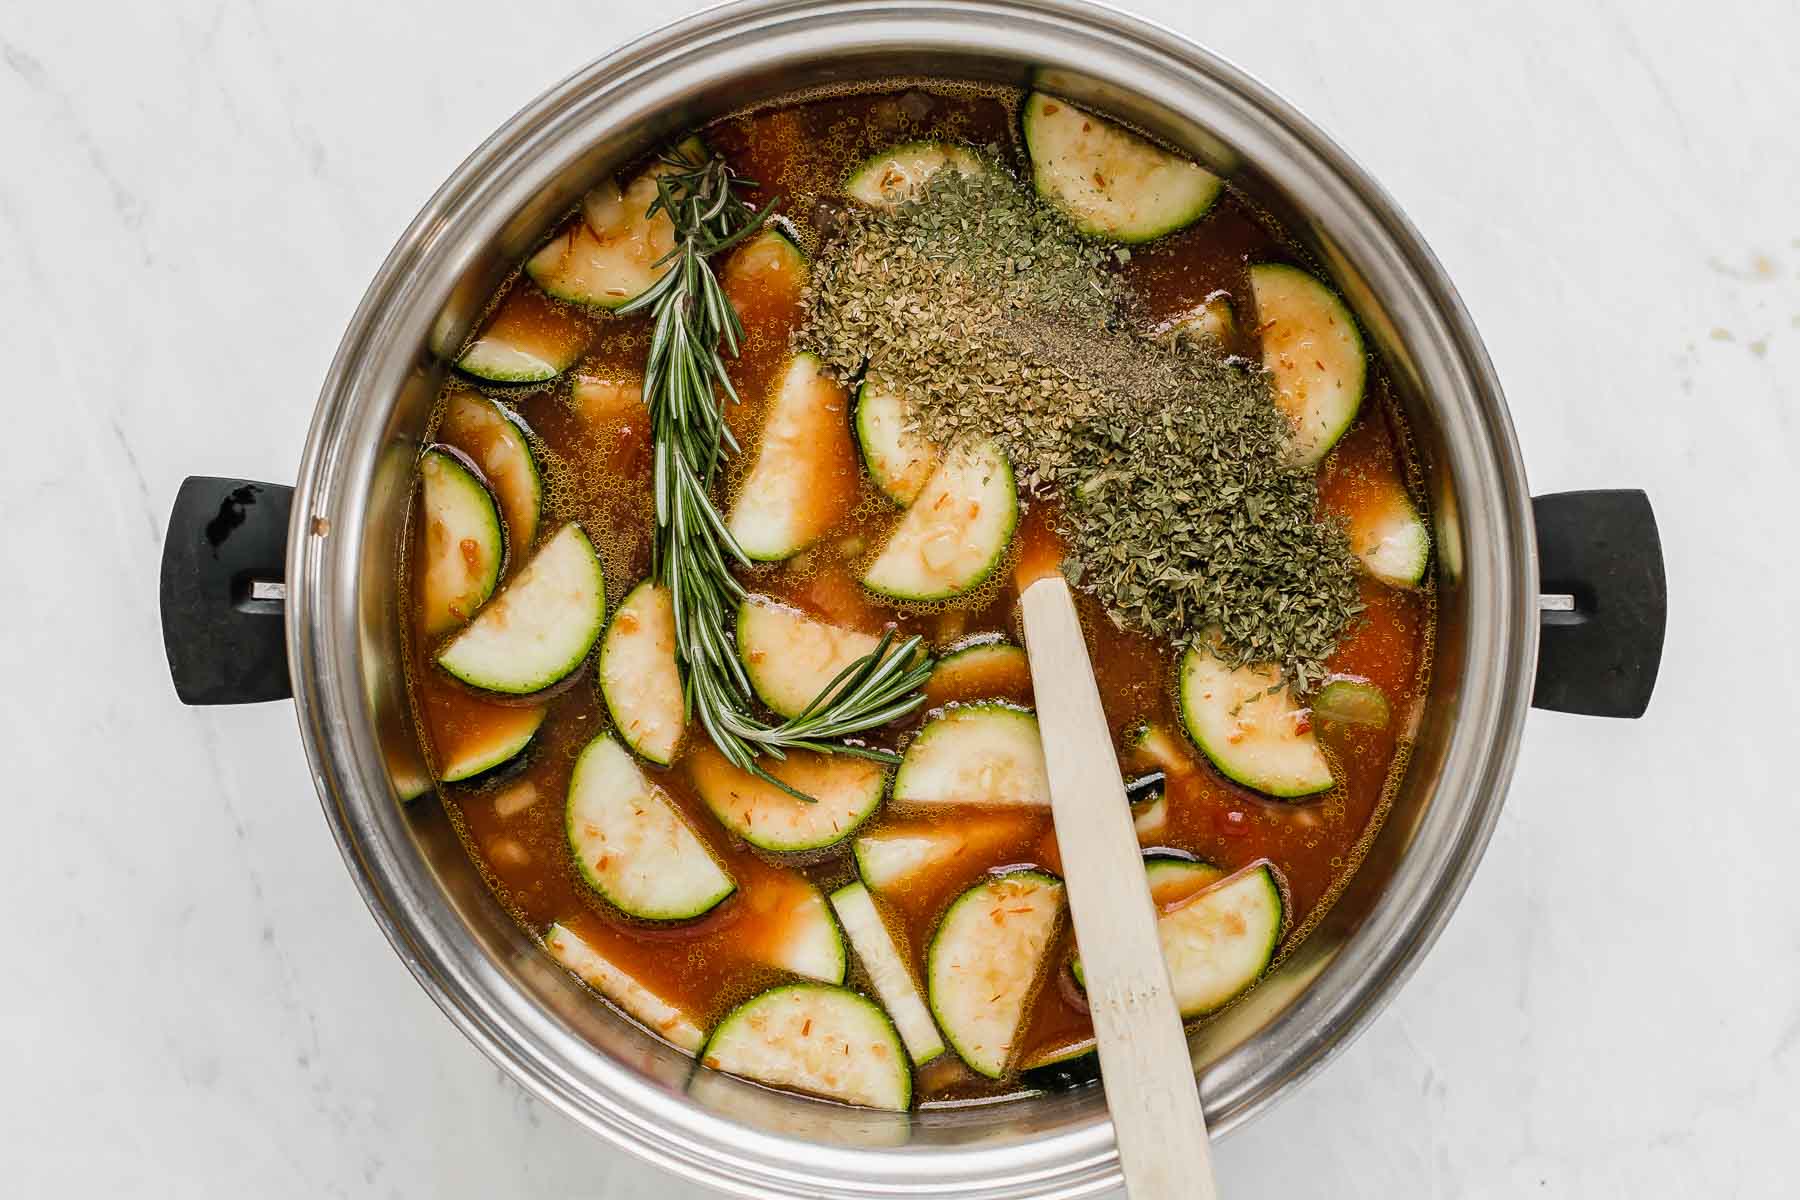 Dried herbs and rosemary sprig in soup pot with zucchini and tomato broth.